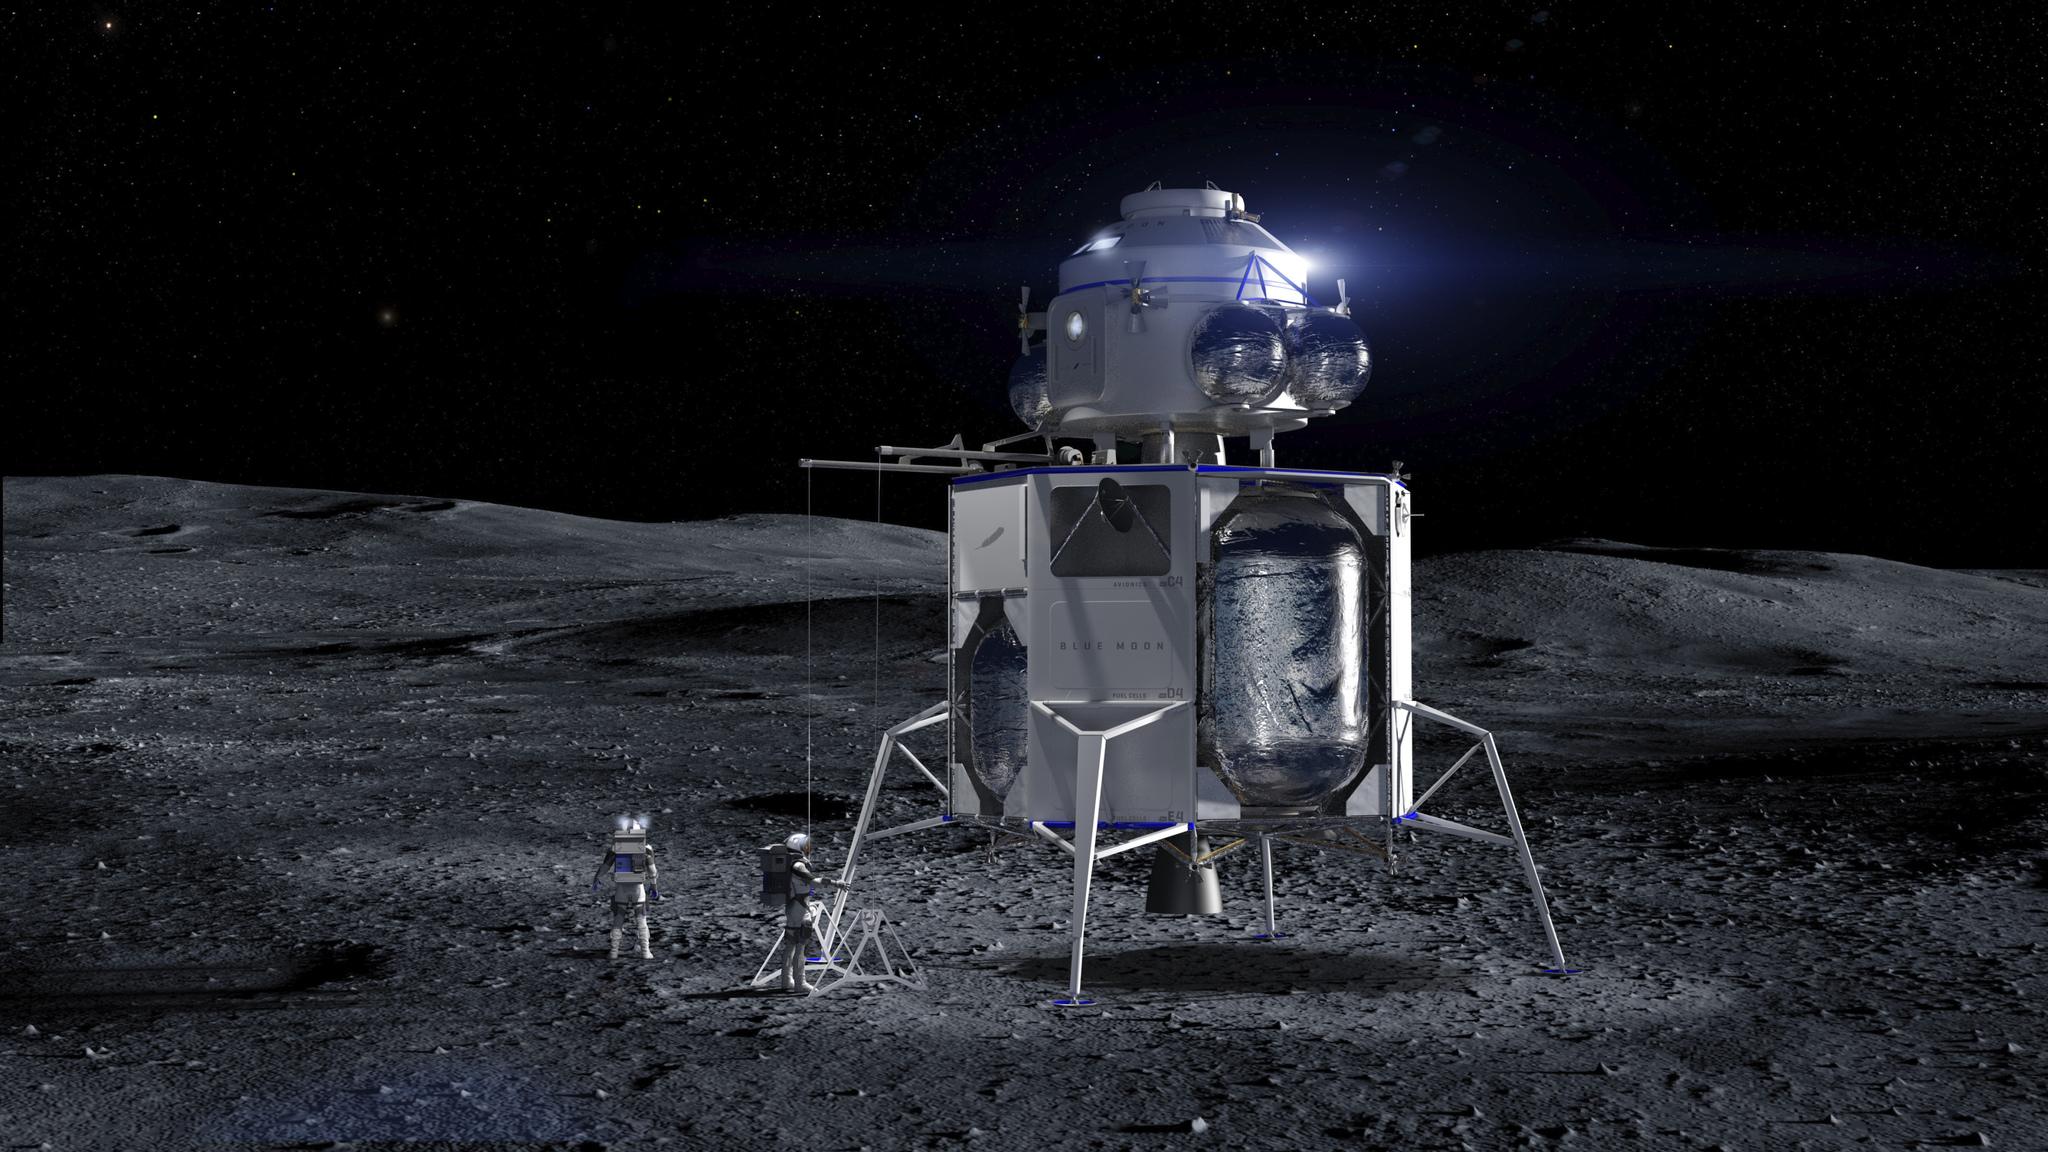 NASA's full Artemis plan revealed: 37 launches and a lunar outpost